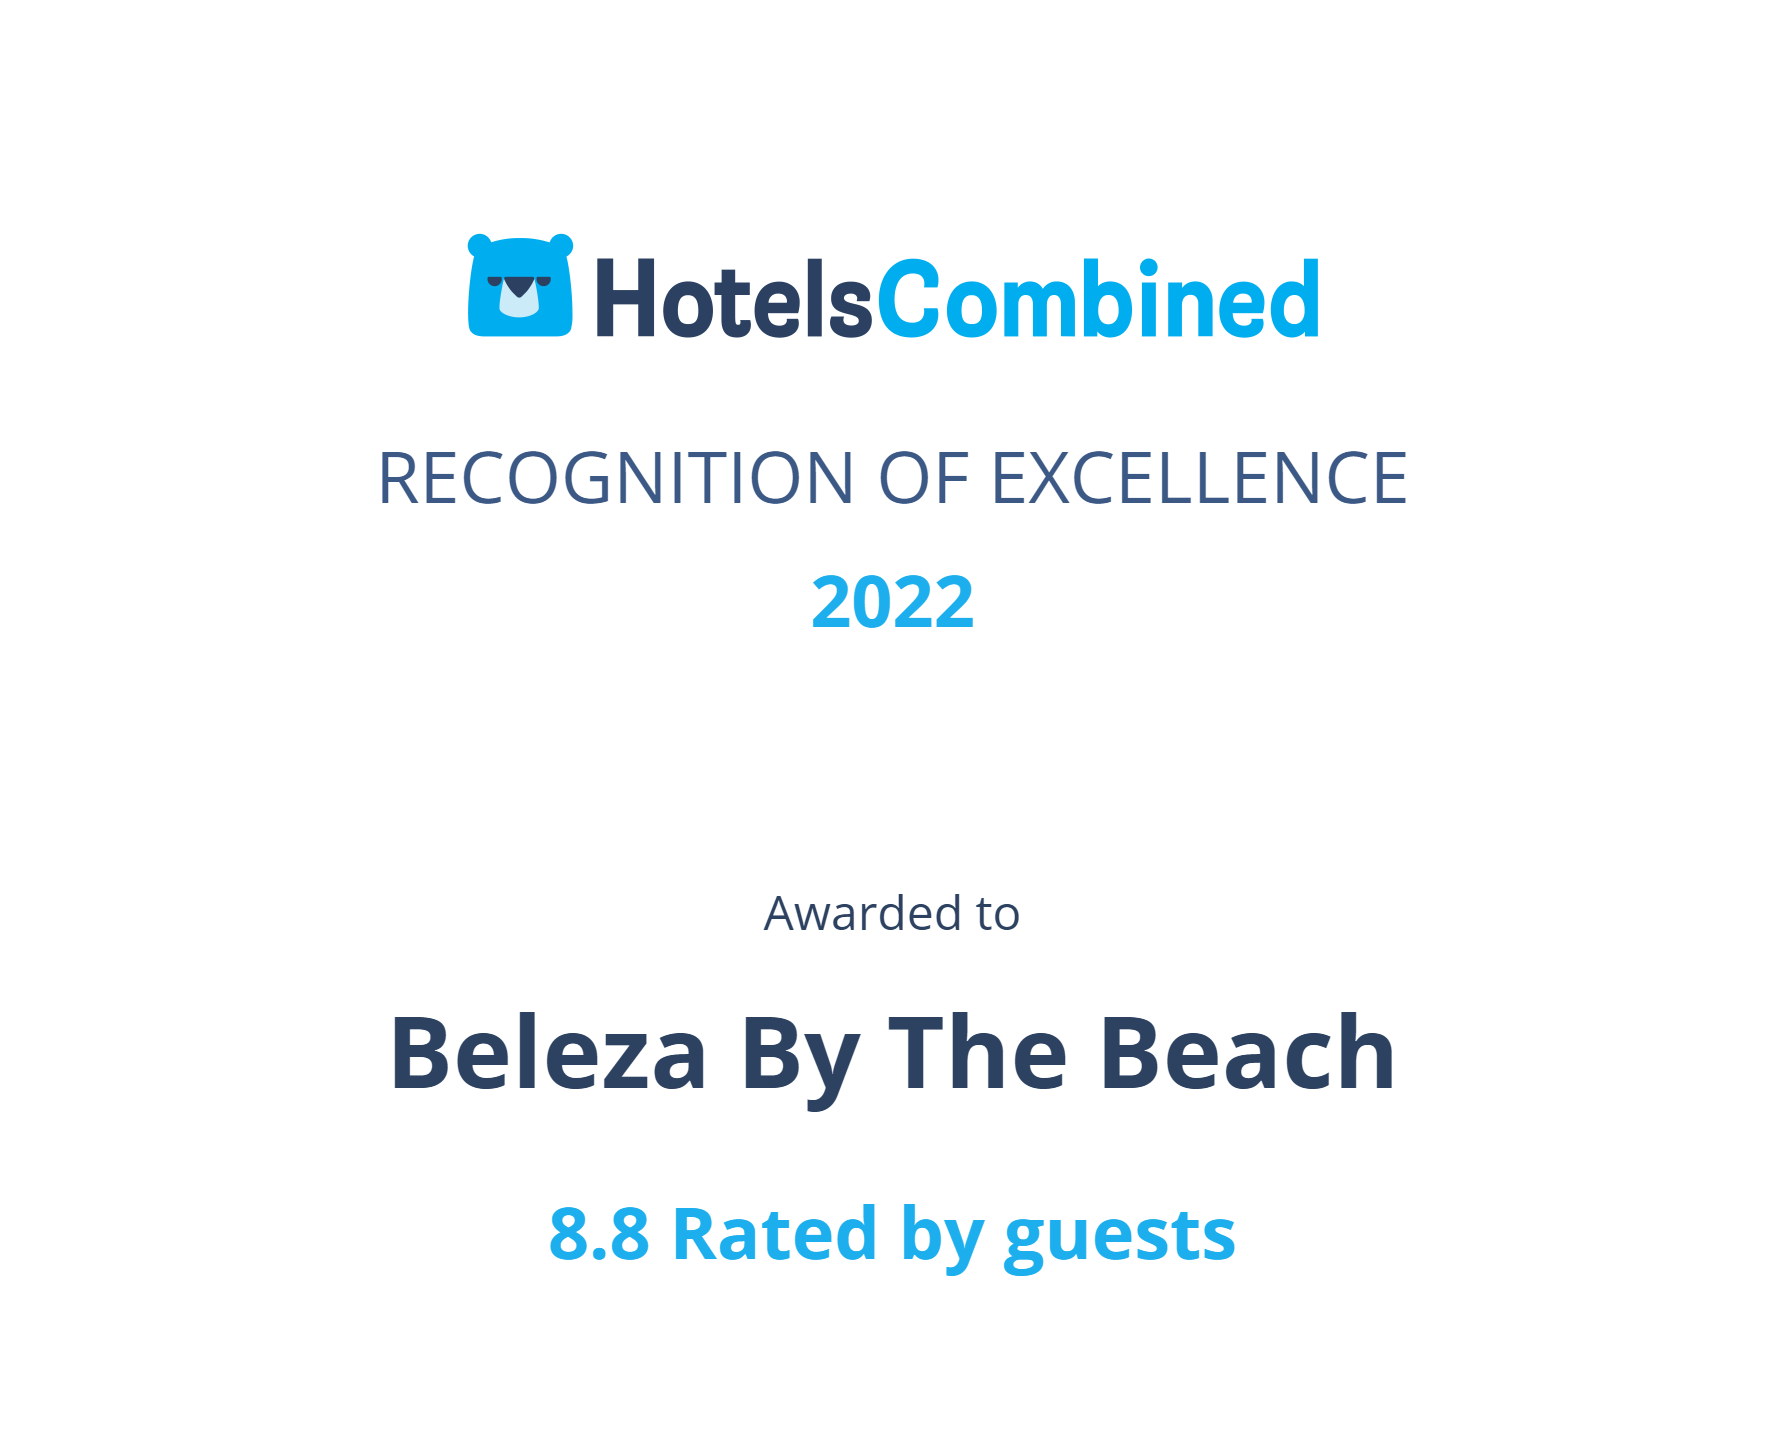 Beleza By The Beach ranked amongst the best hotels in India – HotelsCombined